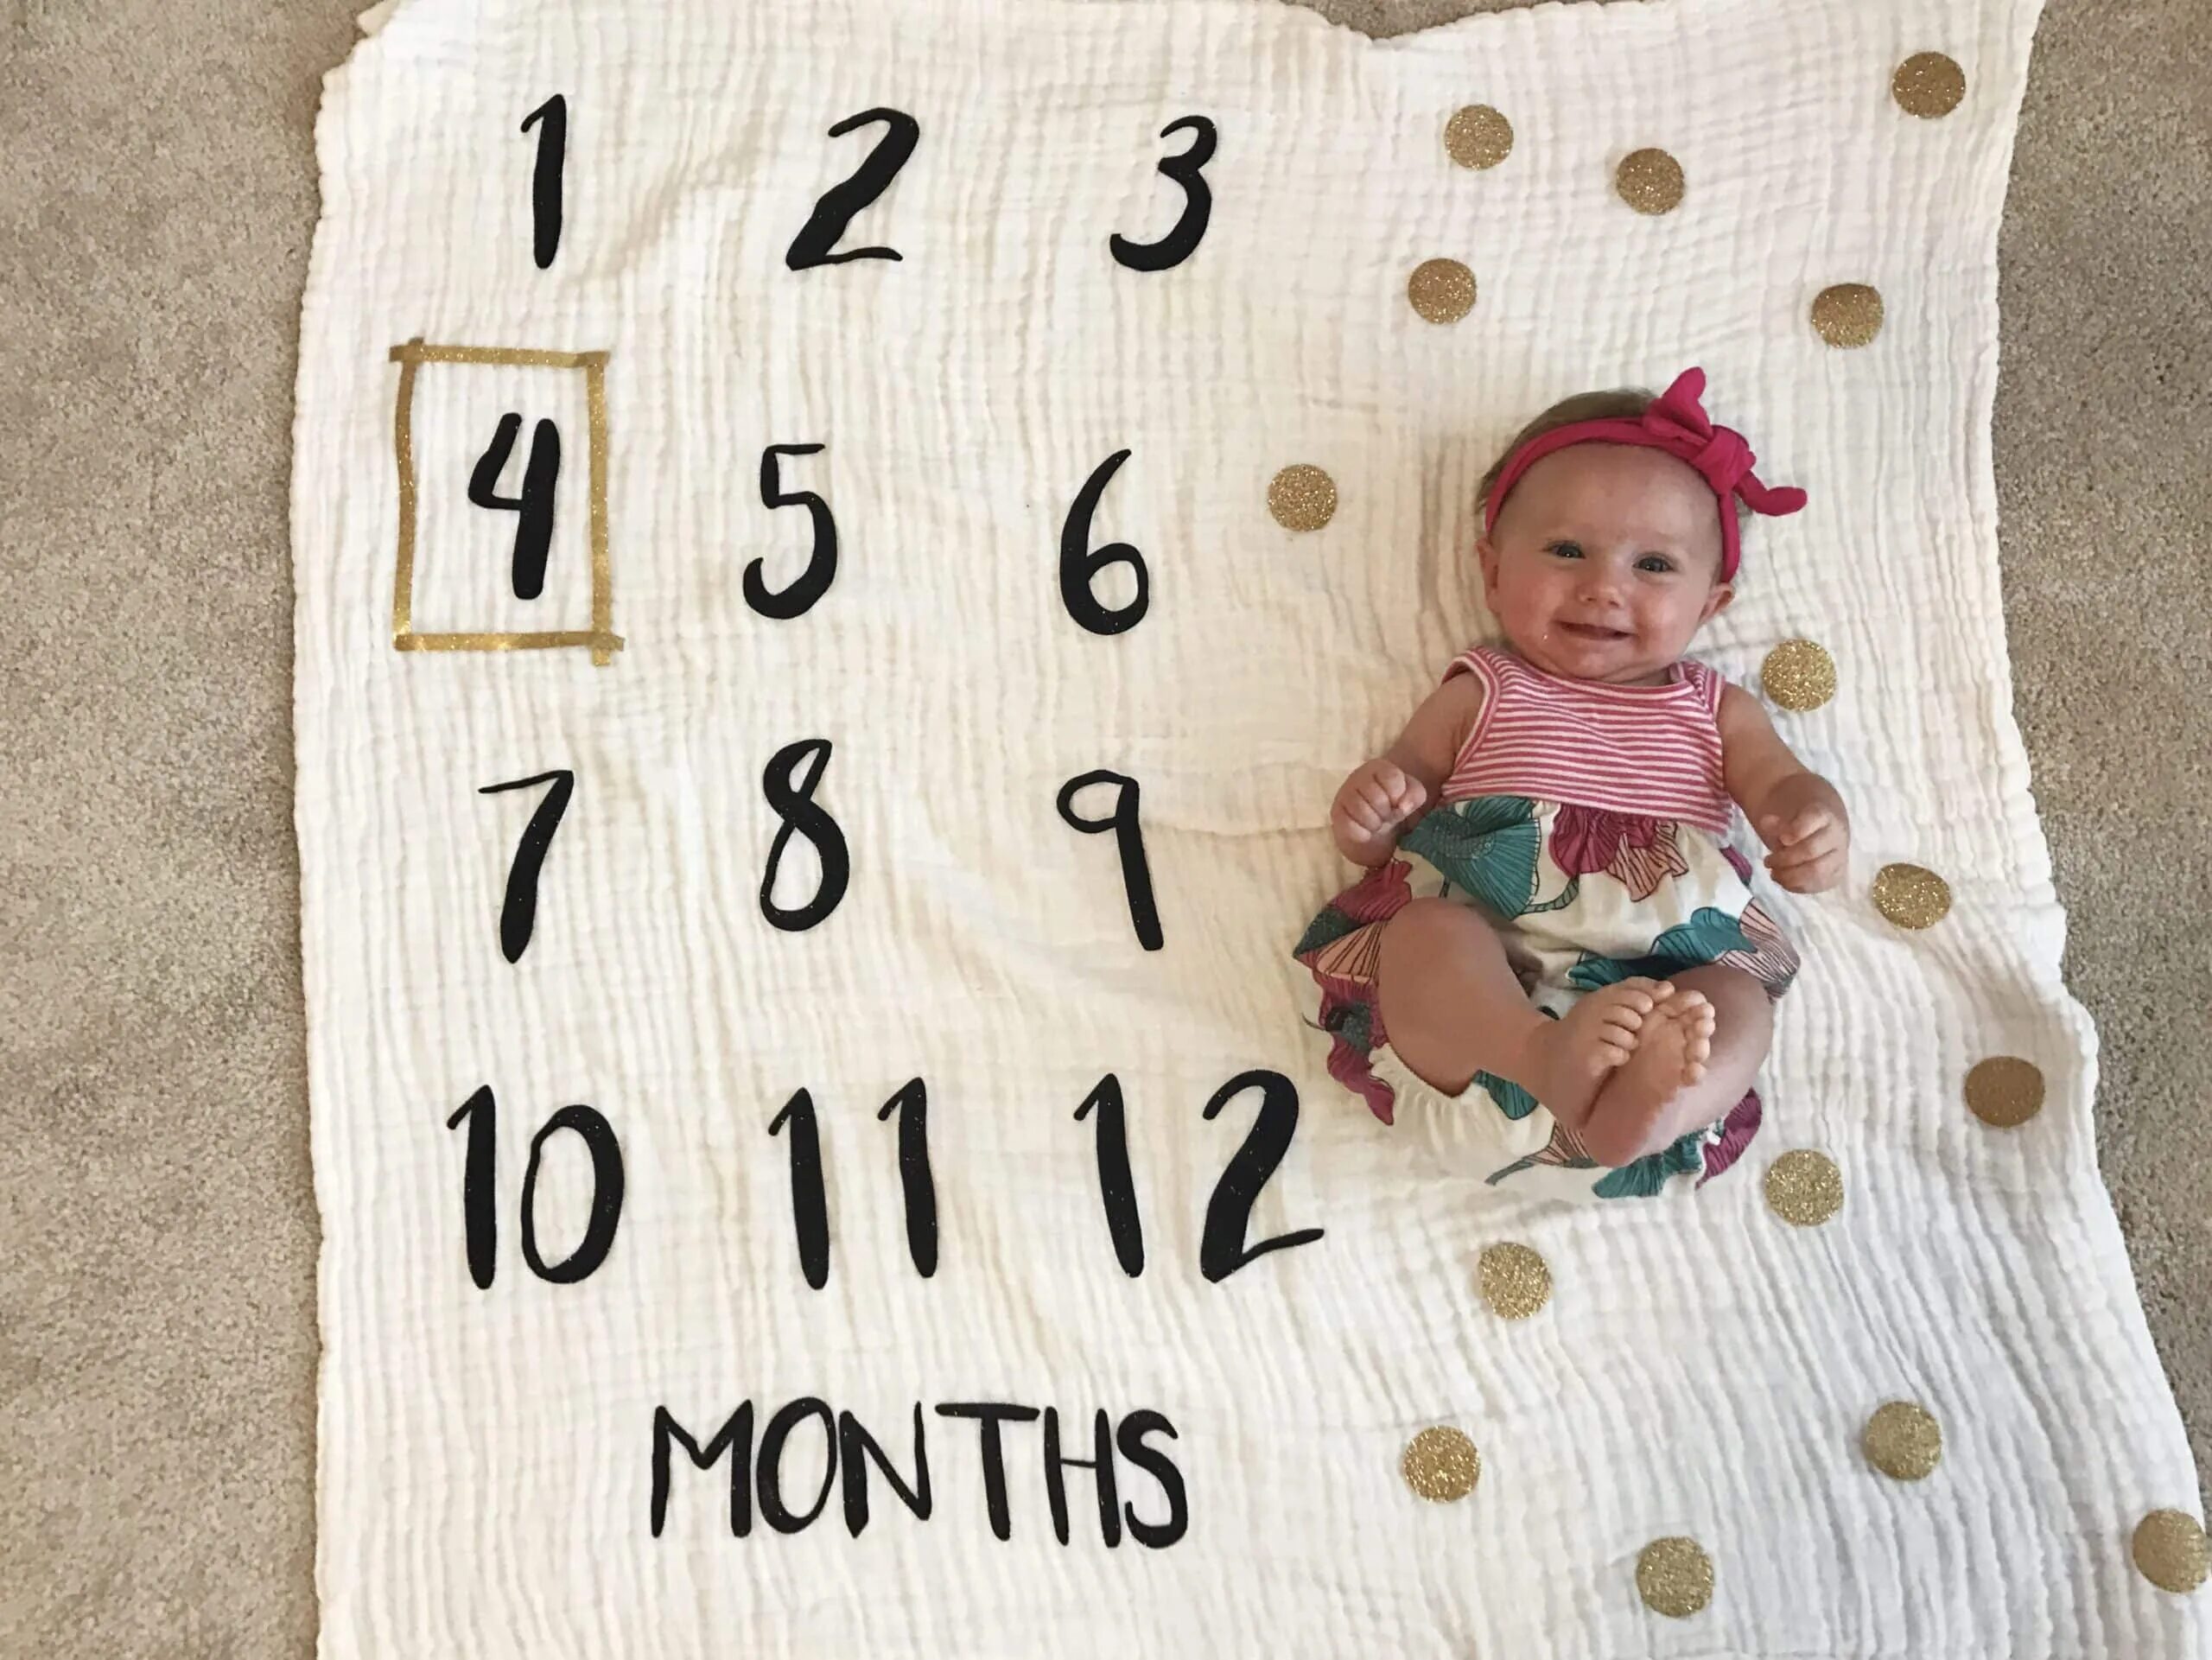 4 months old. Baby month. 4 Months Baby. 4 Месяца карточка. 1 Month Baby.